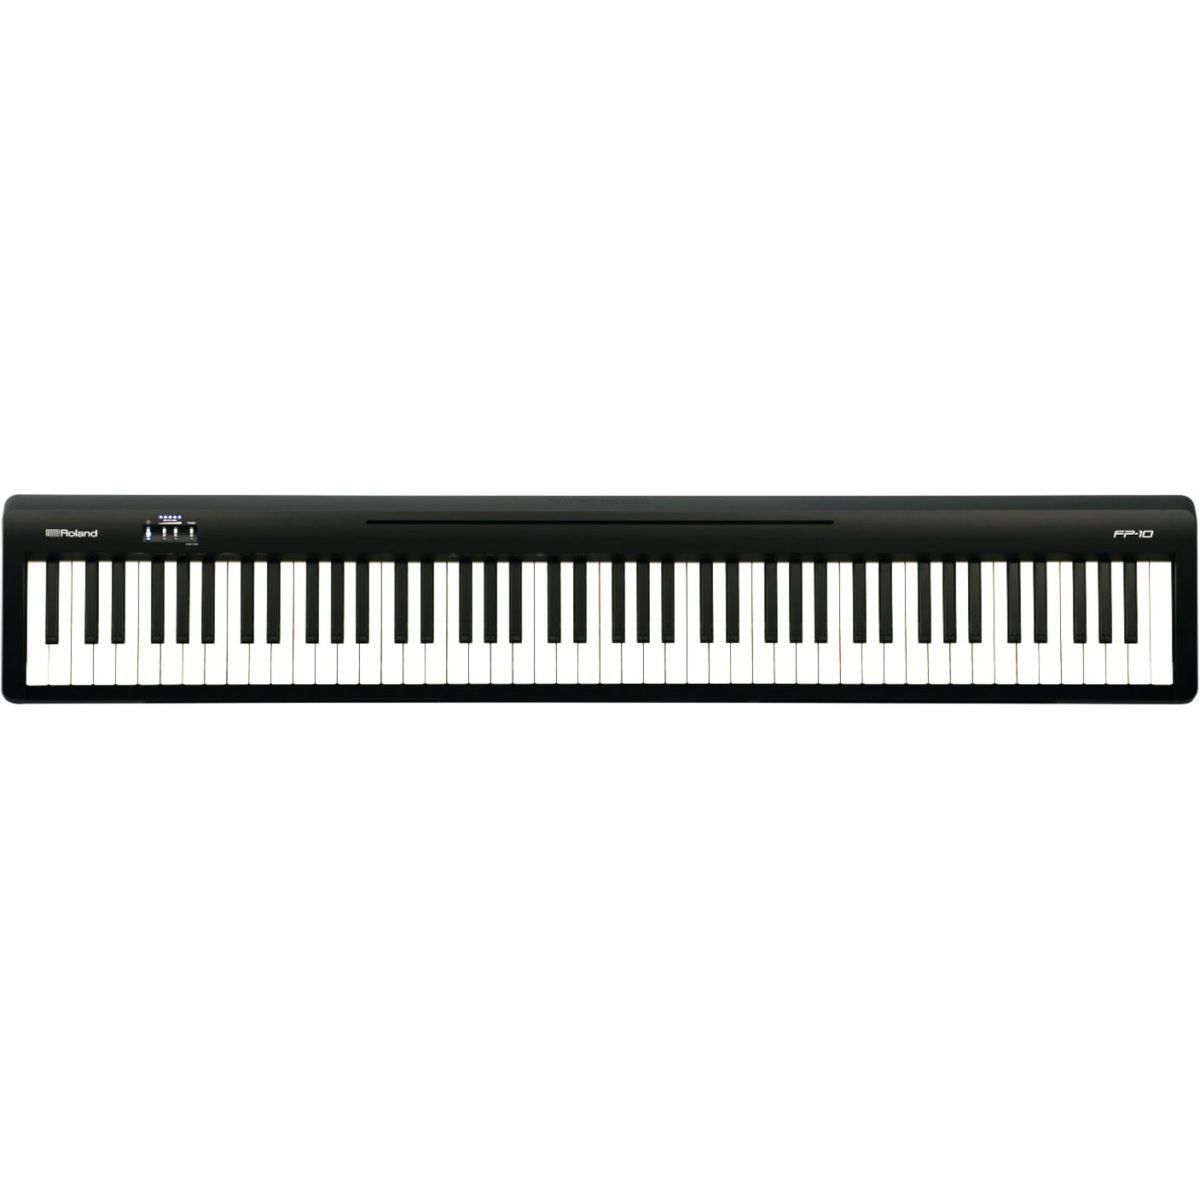 Accessoire Claviers et Pianos Stay Music Compact Model White stand clavier